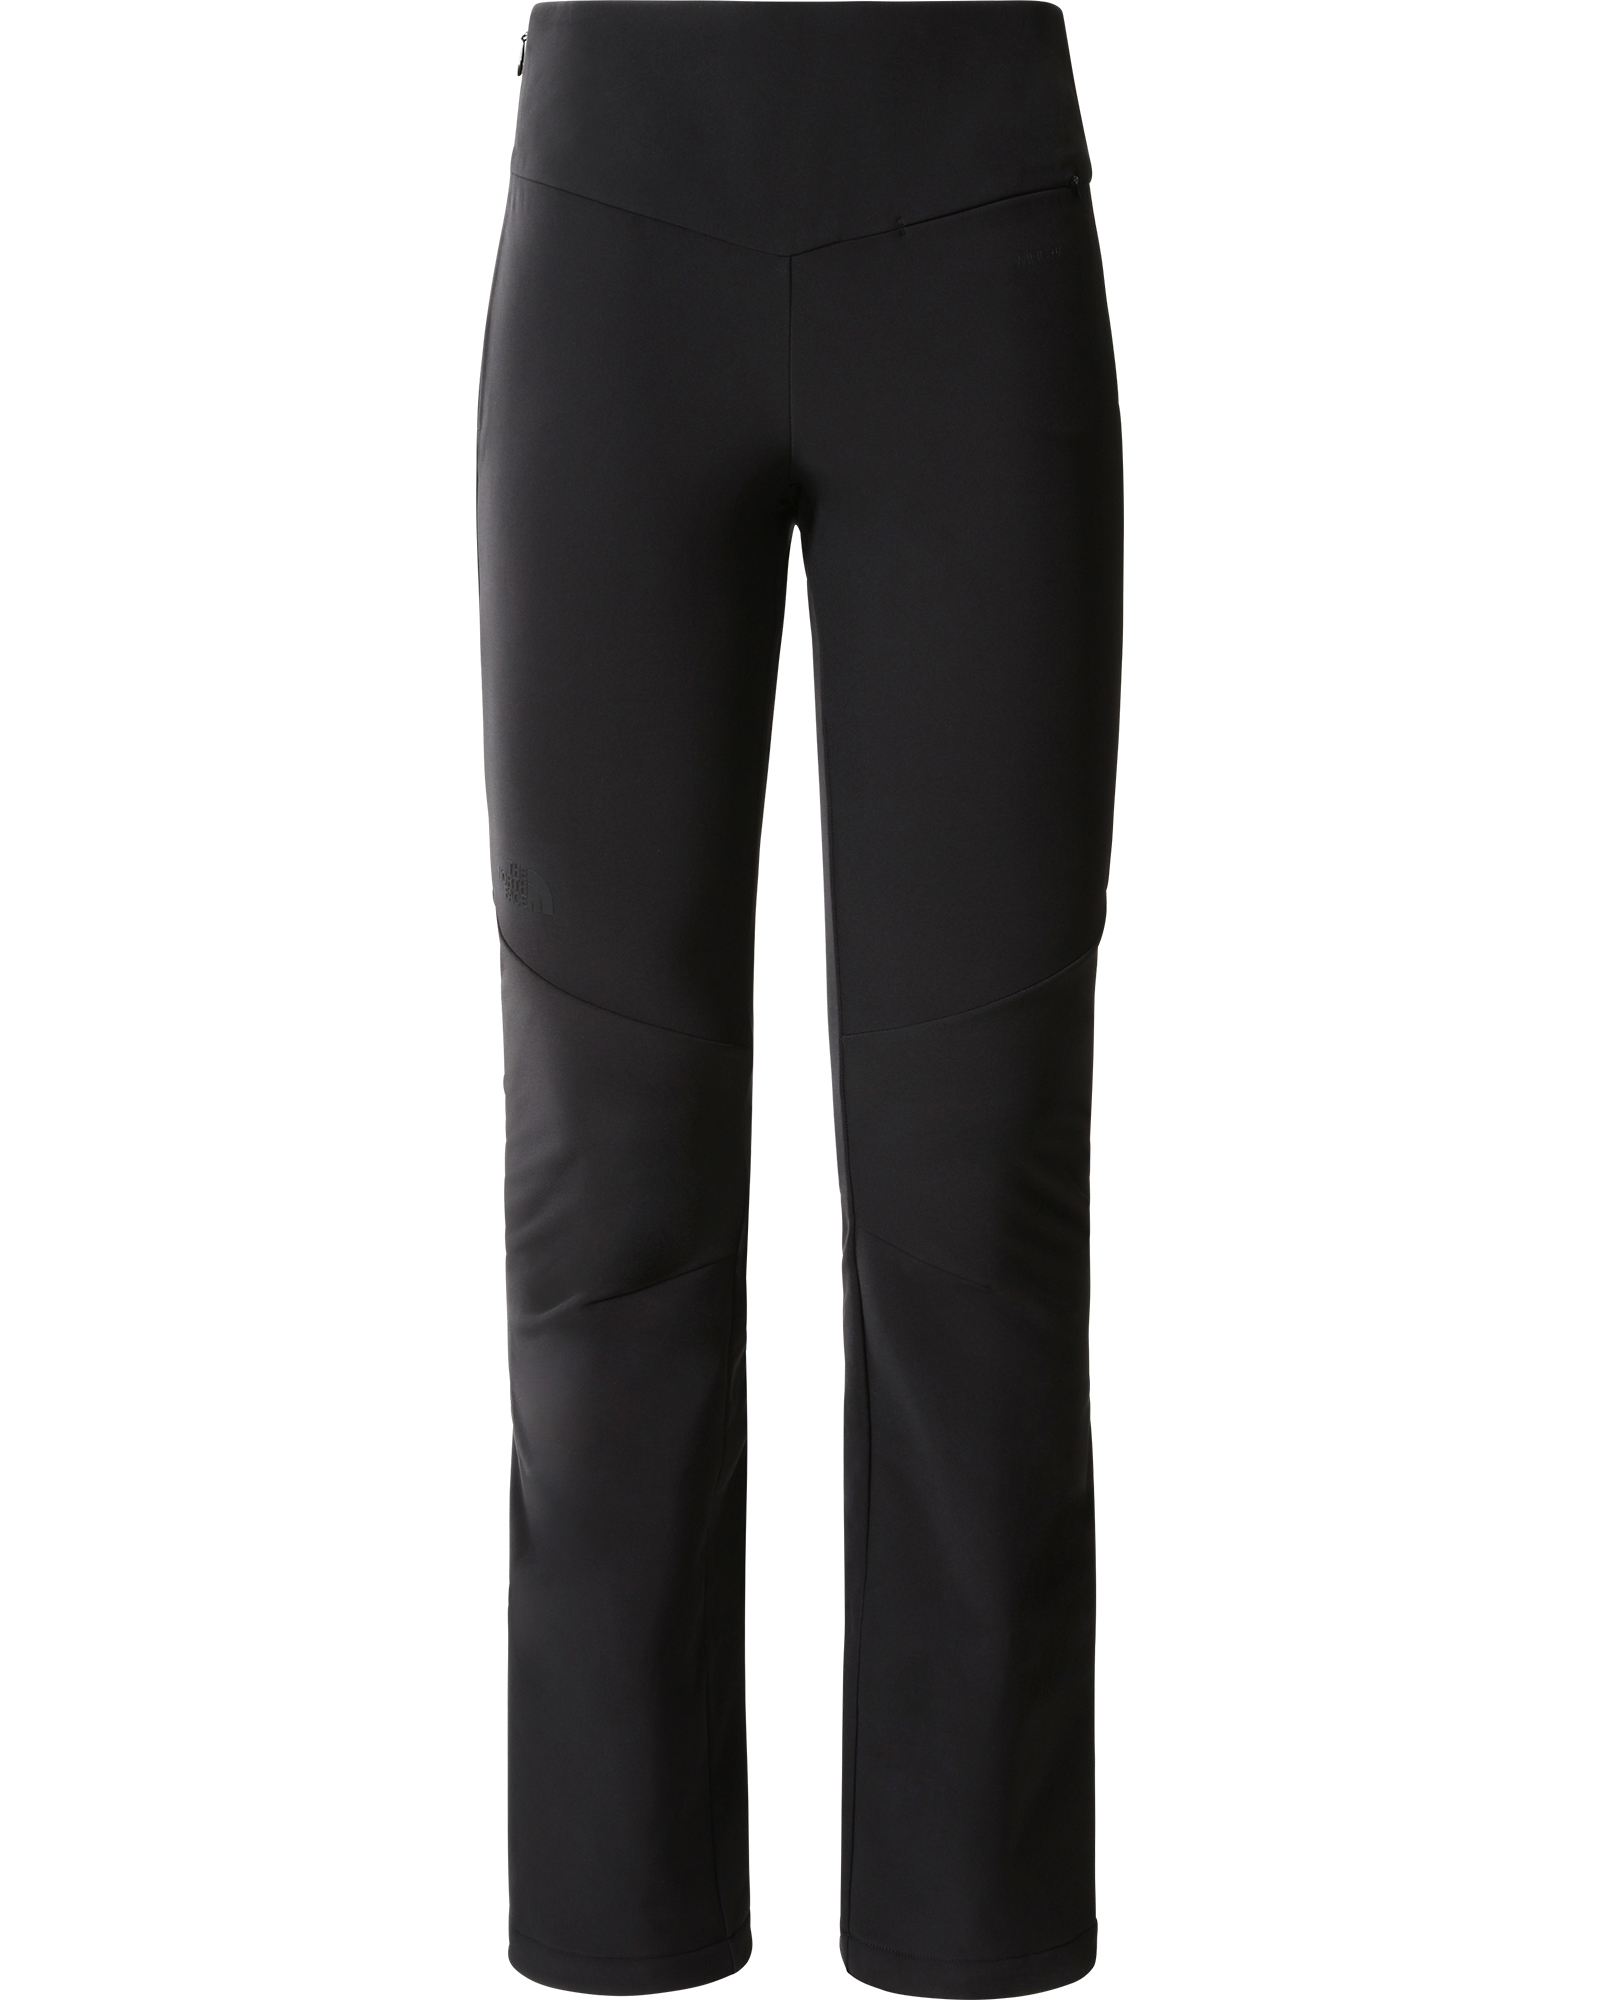 The North Face Snoga Stretch Women’s Pants - TNF Black 8S